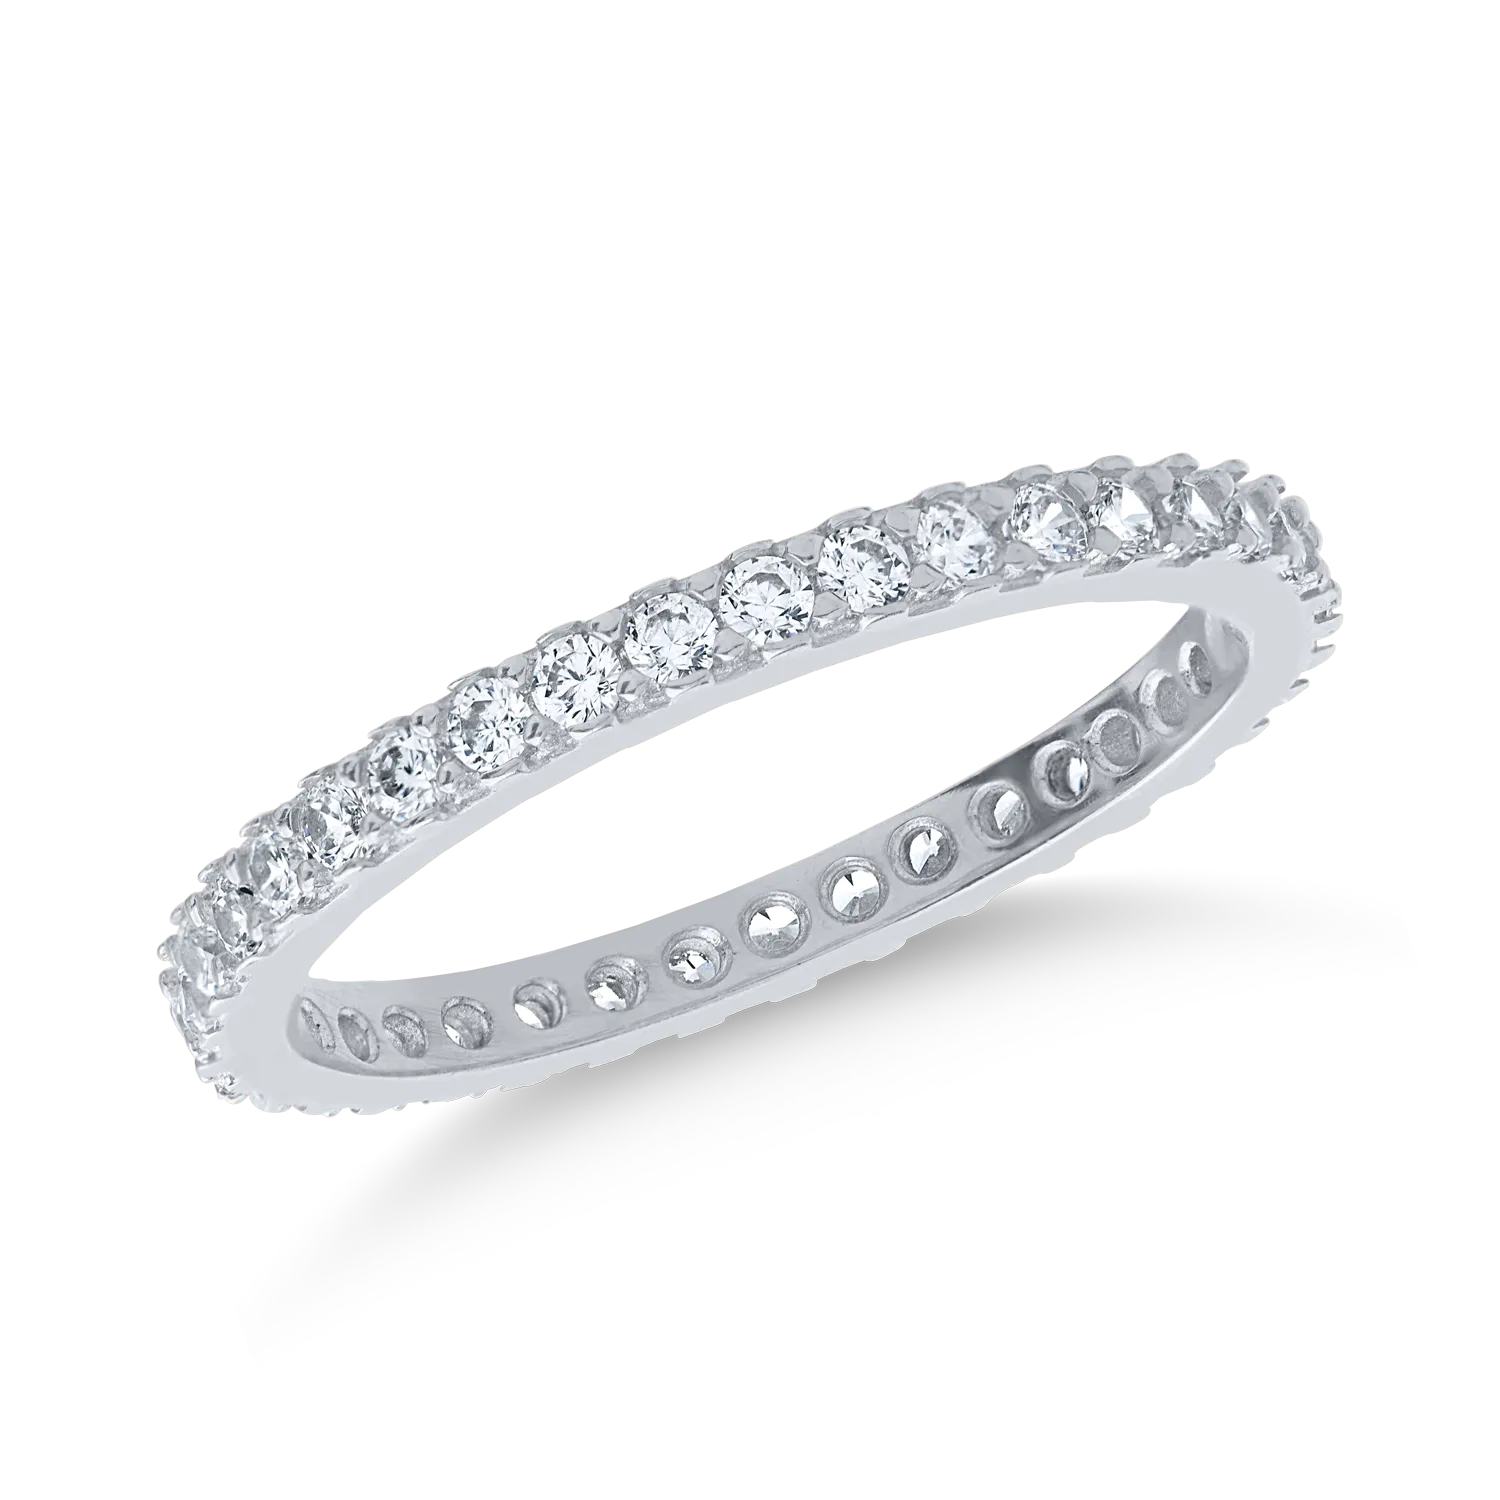 Eternity ring in white gold